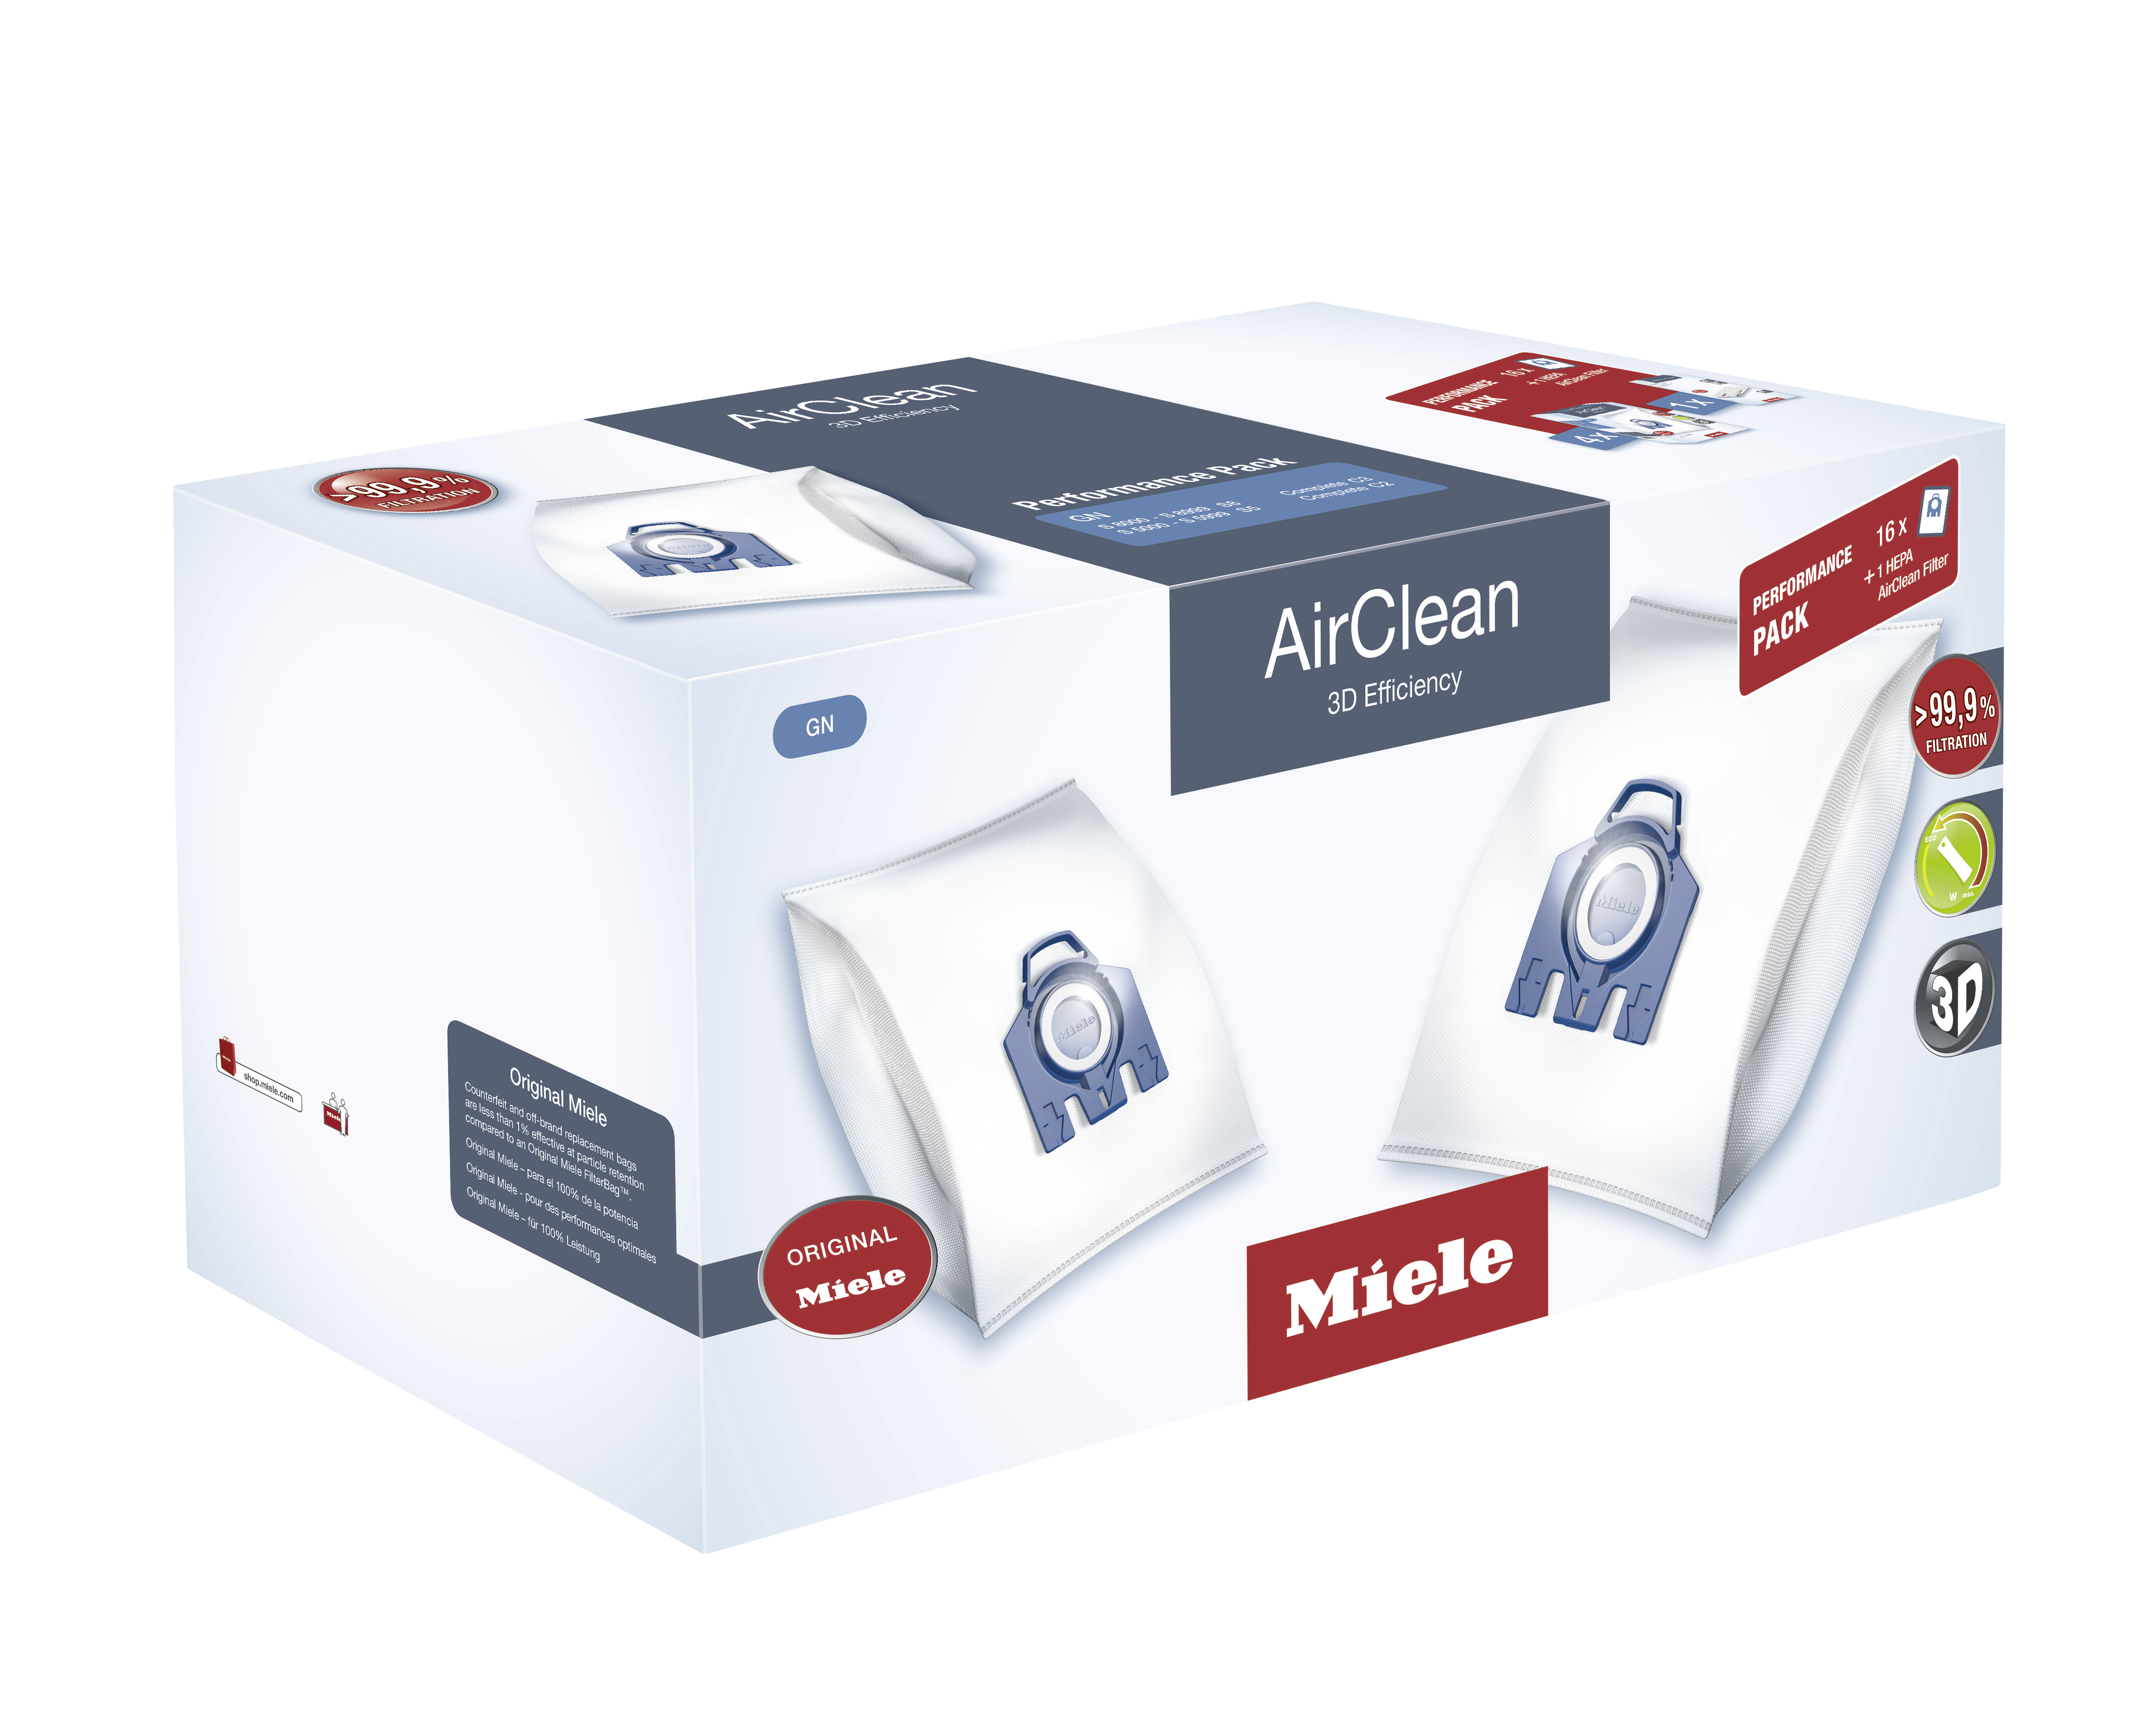 Miele AirClean 3d Efficiency Filterbags Type GN and Ha30 HEPA Filter Performance for sale online